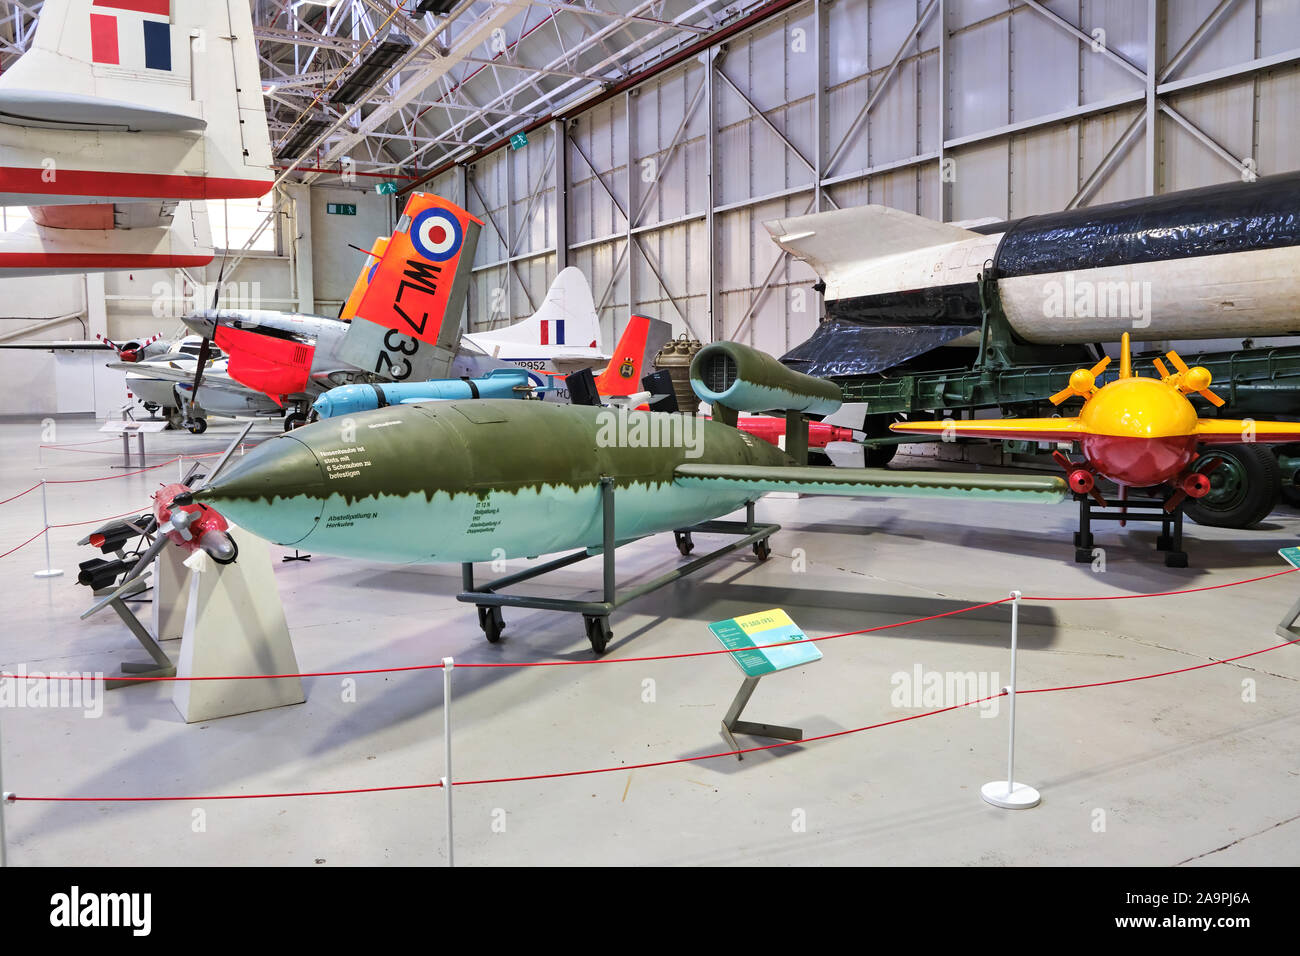 V1 flying bomb vengeance weapon also known as a doodlebug or buzz bomb (an early cruise missile propelled by a pulsejet engine) on display at the RAF Cosford air museum in Shropshire Stock Photo